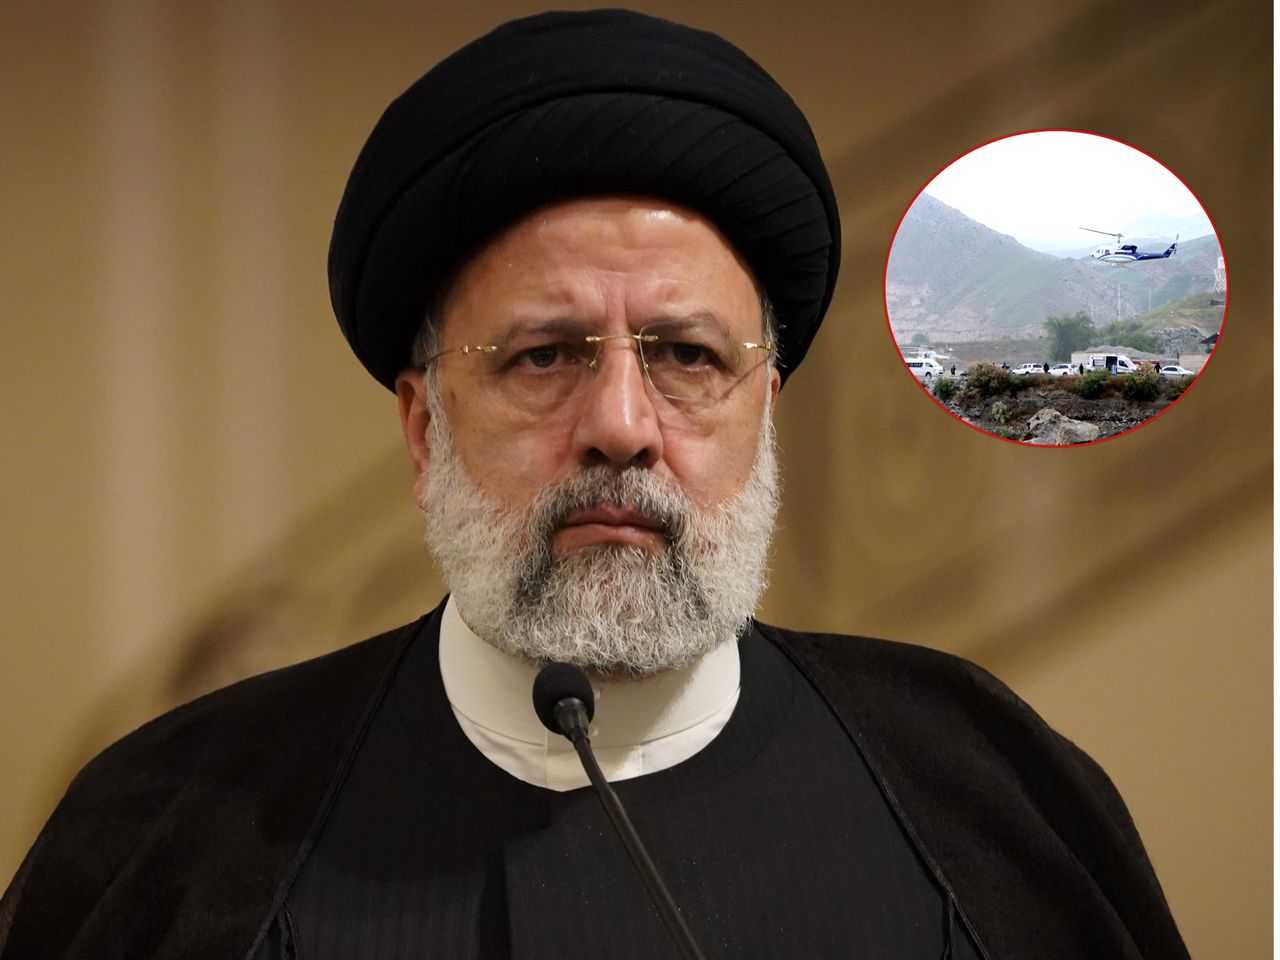 Investigators already know. They examined the wreck of the helicopter in which Ebrahim Raisi died.